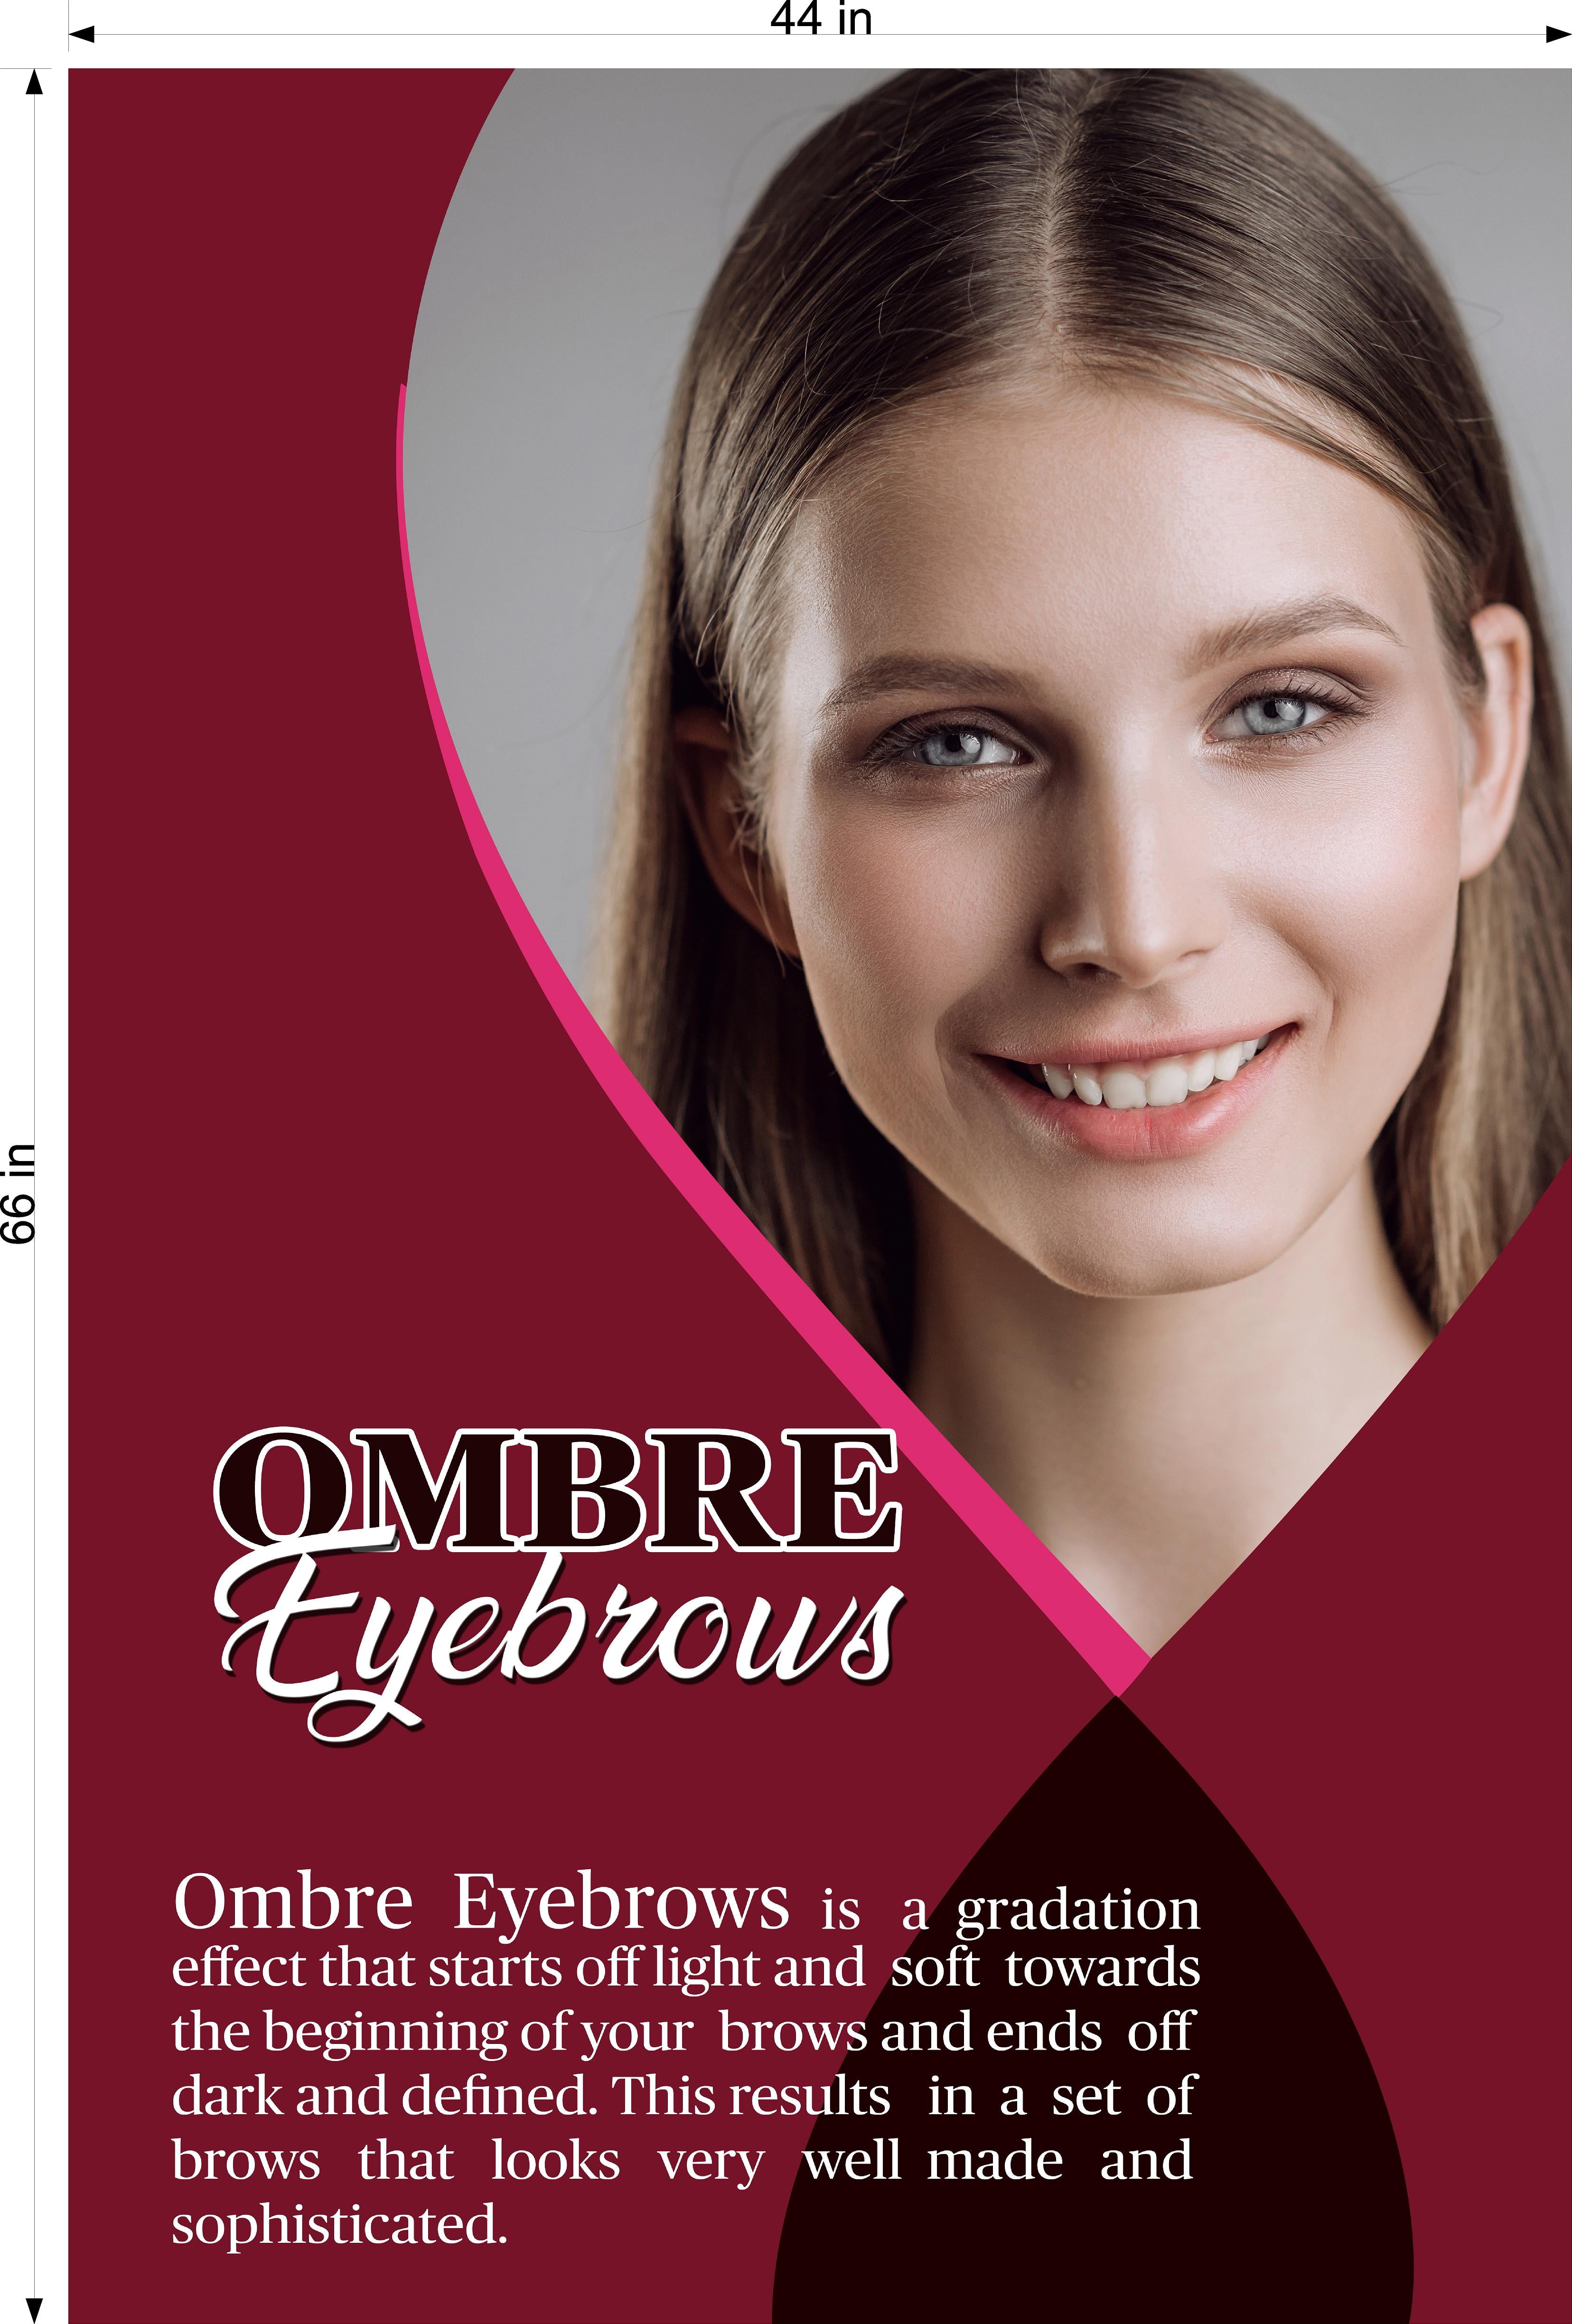 Ombre Eyebrows 03 Photo-Realistic Paper Poster Premium Interior Inside Sign Advertising Marketing Wall Window Non-Laminated Vertical